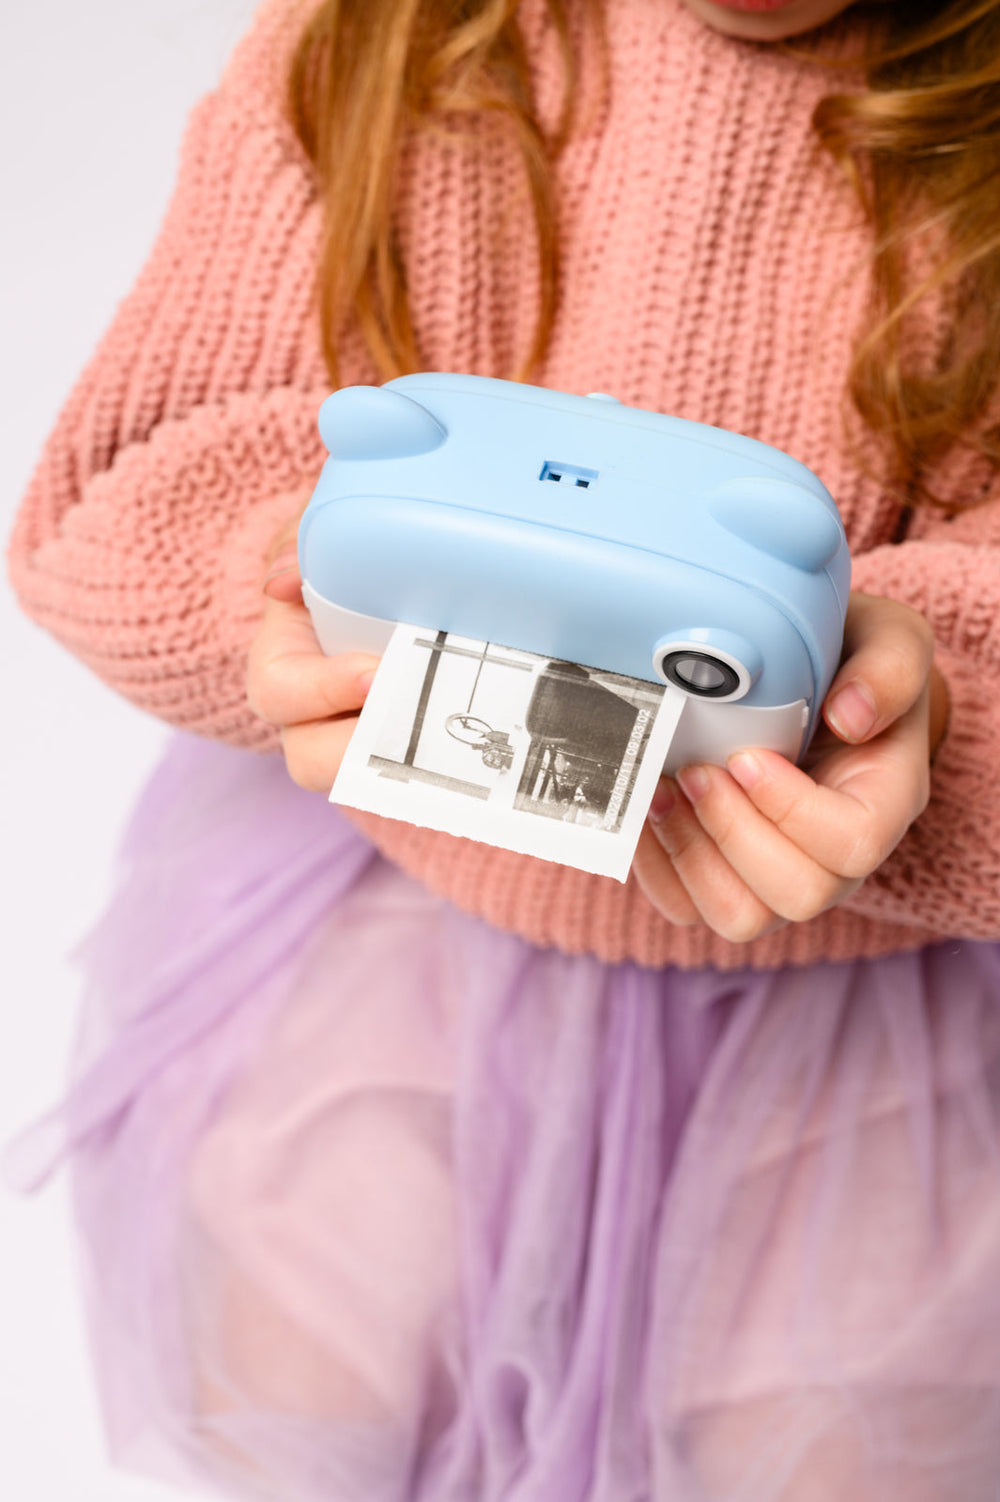 Quick Print Childrens Camera in Blue-220 Beauty/Gift-Inspired by Justeen-Women's Clothing Boutique in Chicago, Illinois